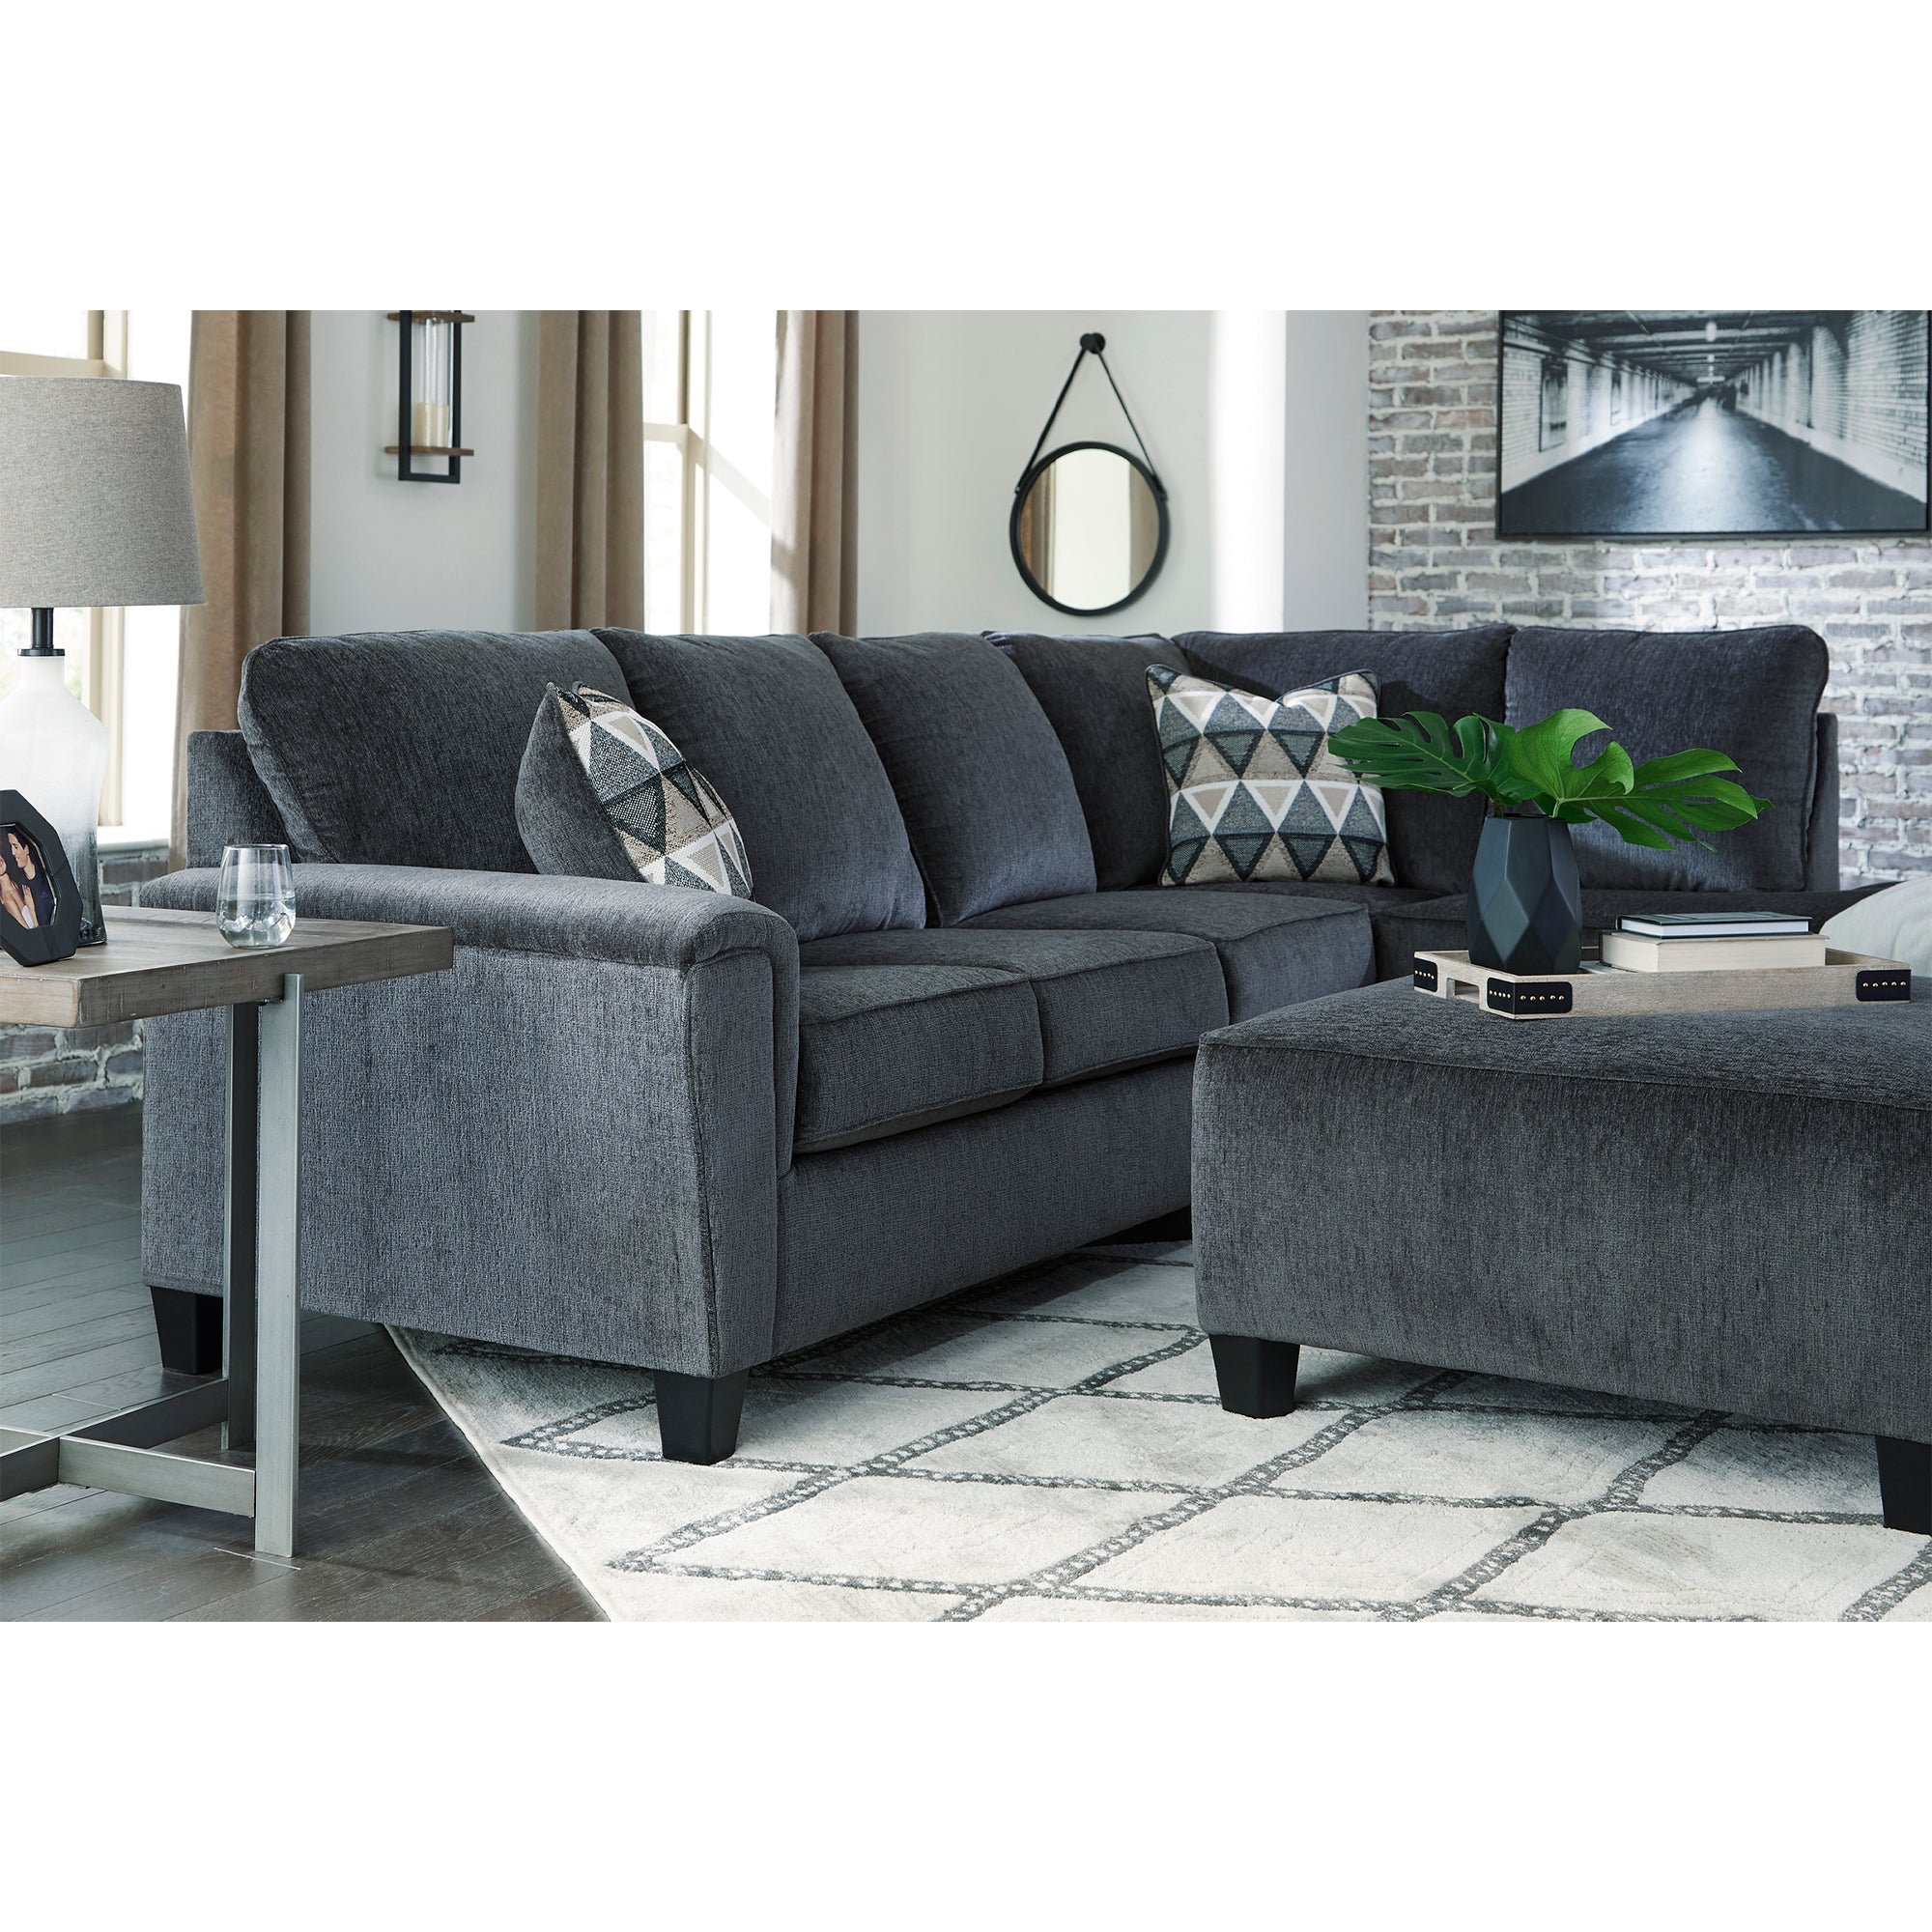 Abinger 2-Piece Sectional with Chaise in Smoke Color